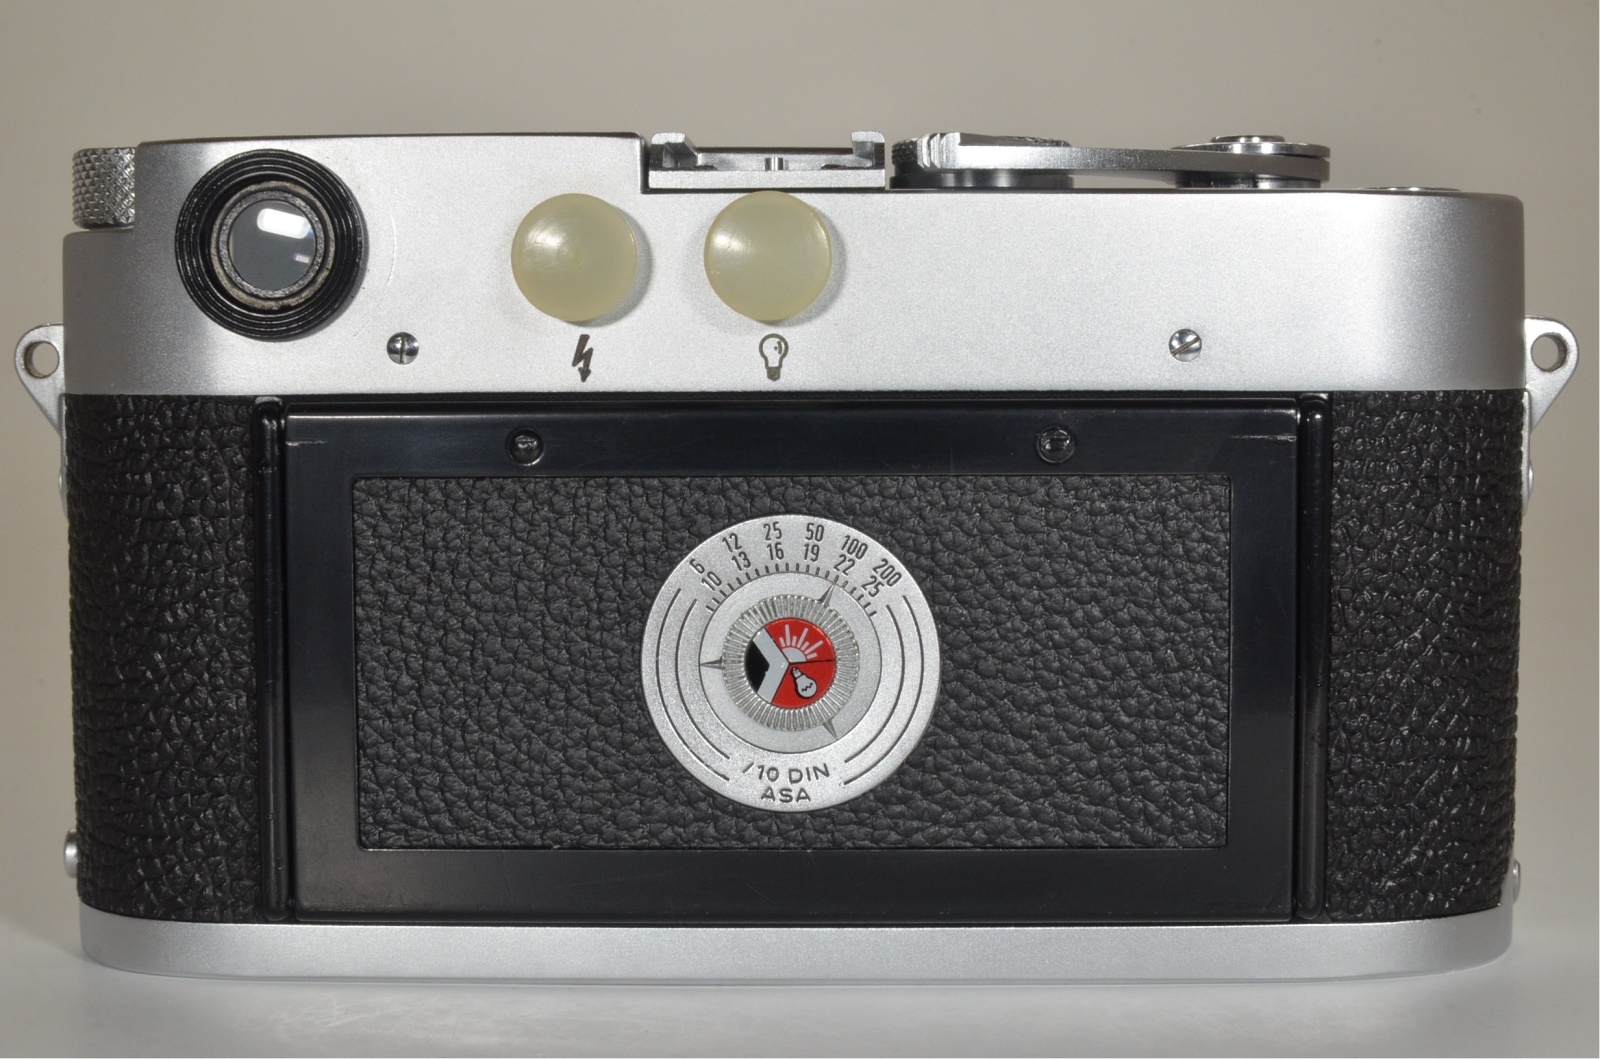 leica m3 double stroke s/n 758390 year 1955 the camera cla'd recently